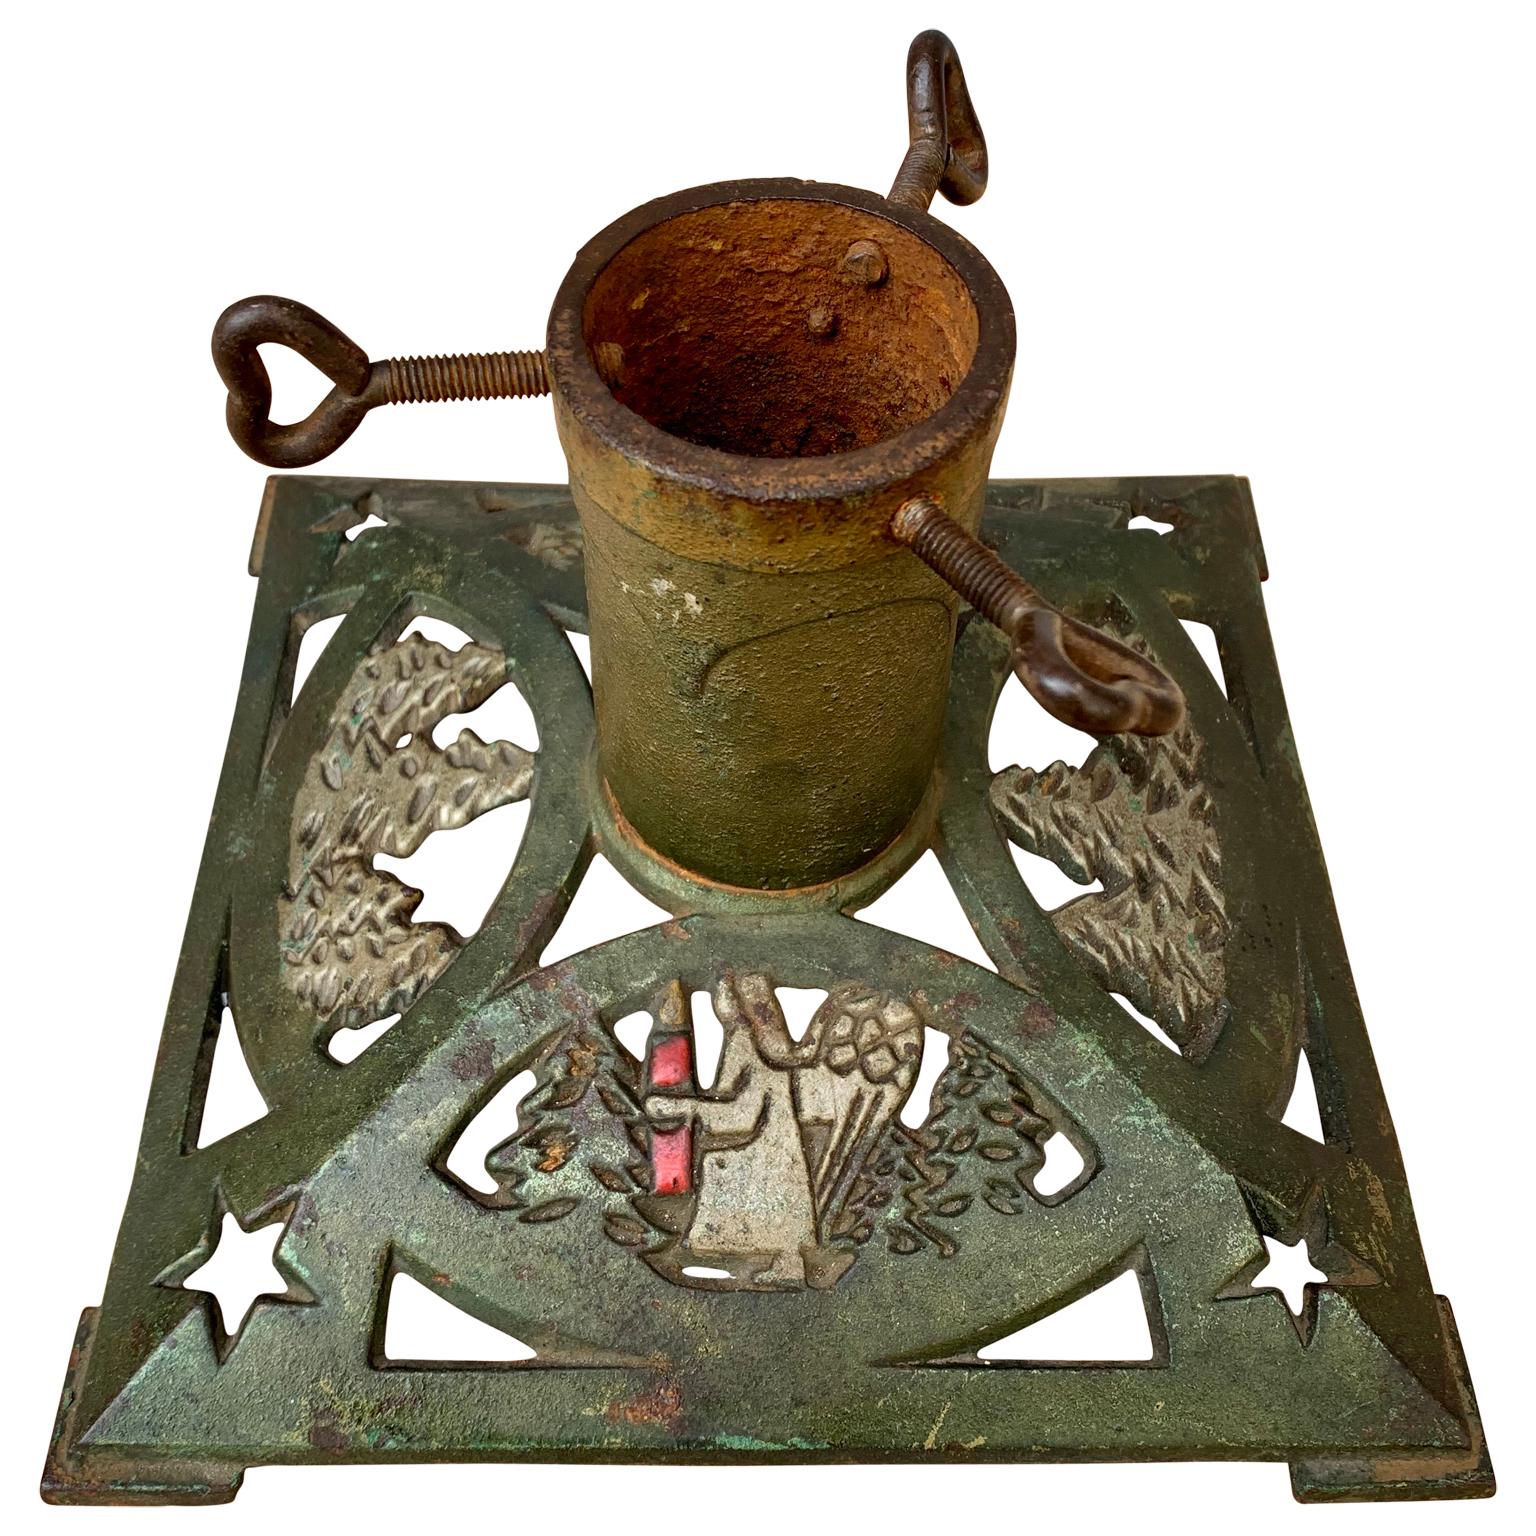 A small square Christmas tree stand in original painted cast iron from circa 1900s. Decorated with snow covered trees and angels carrying a red candle. With the screw to hold the tree in the foot, forged in form of hearts. The inside diameter of the